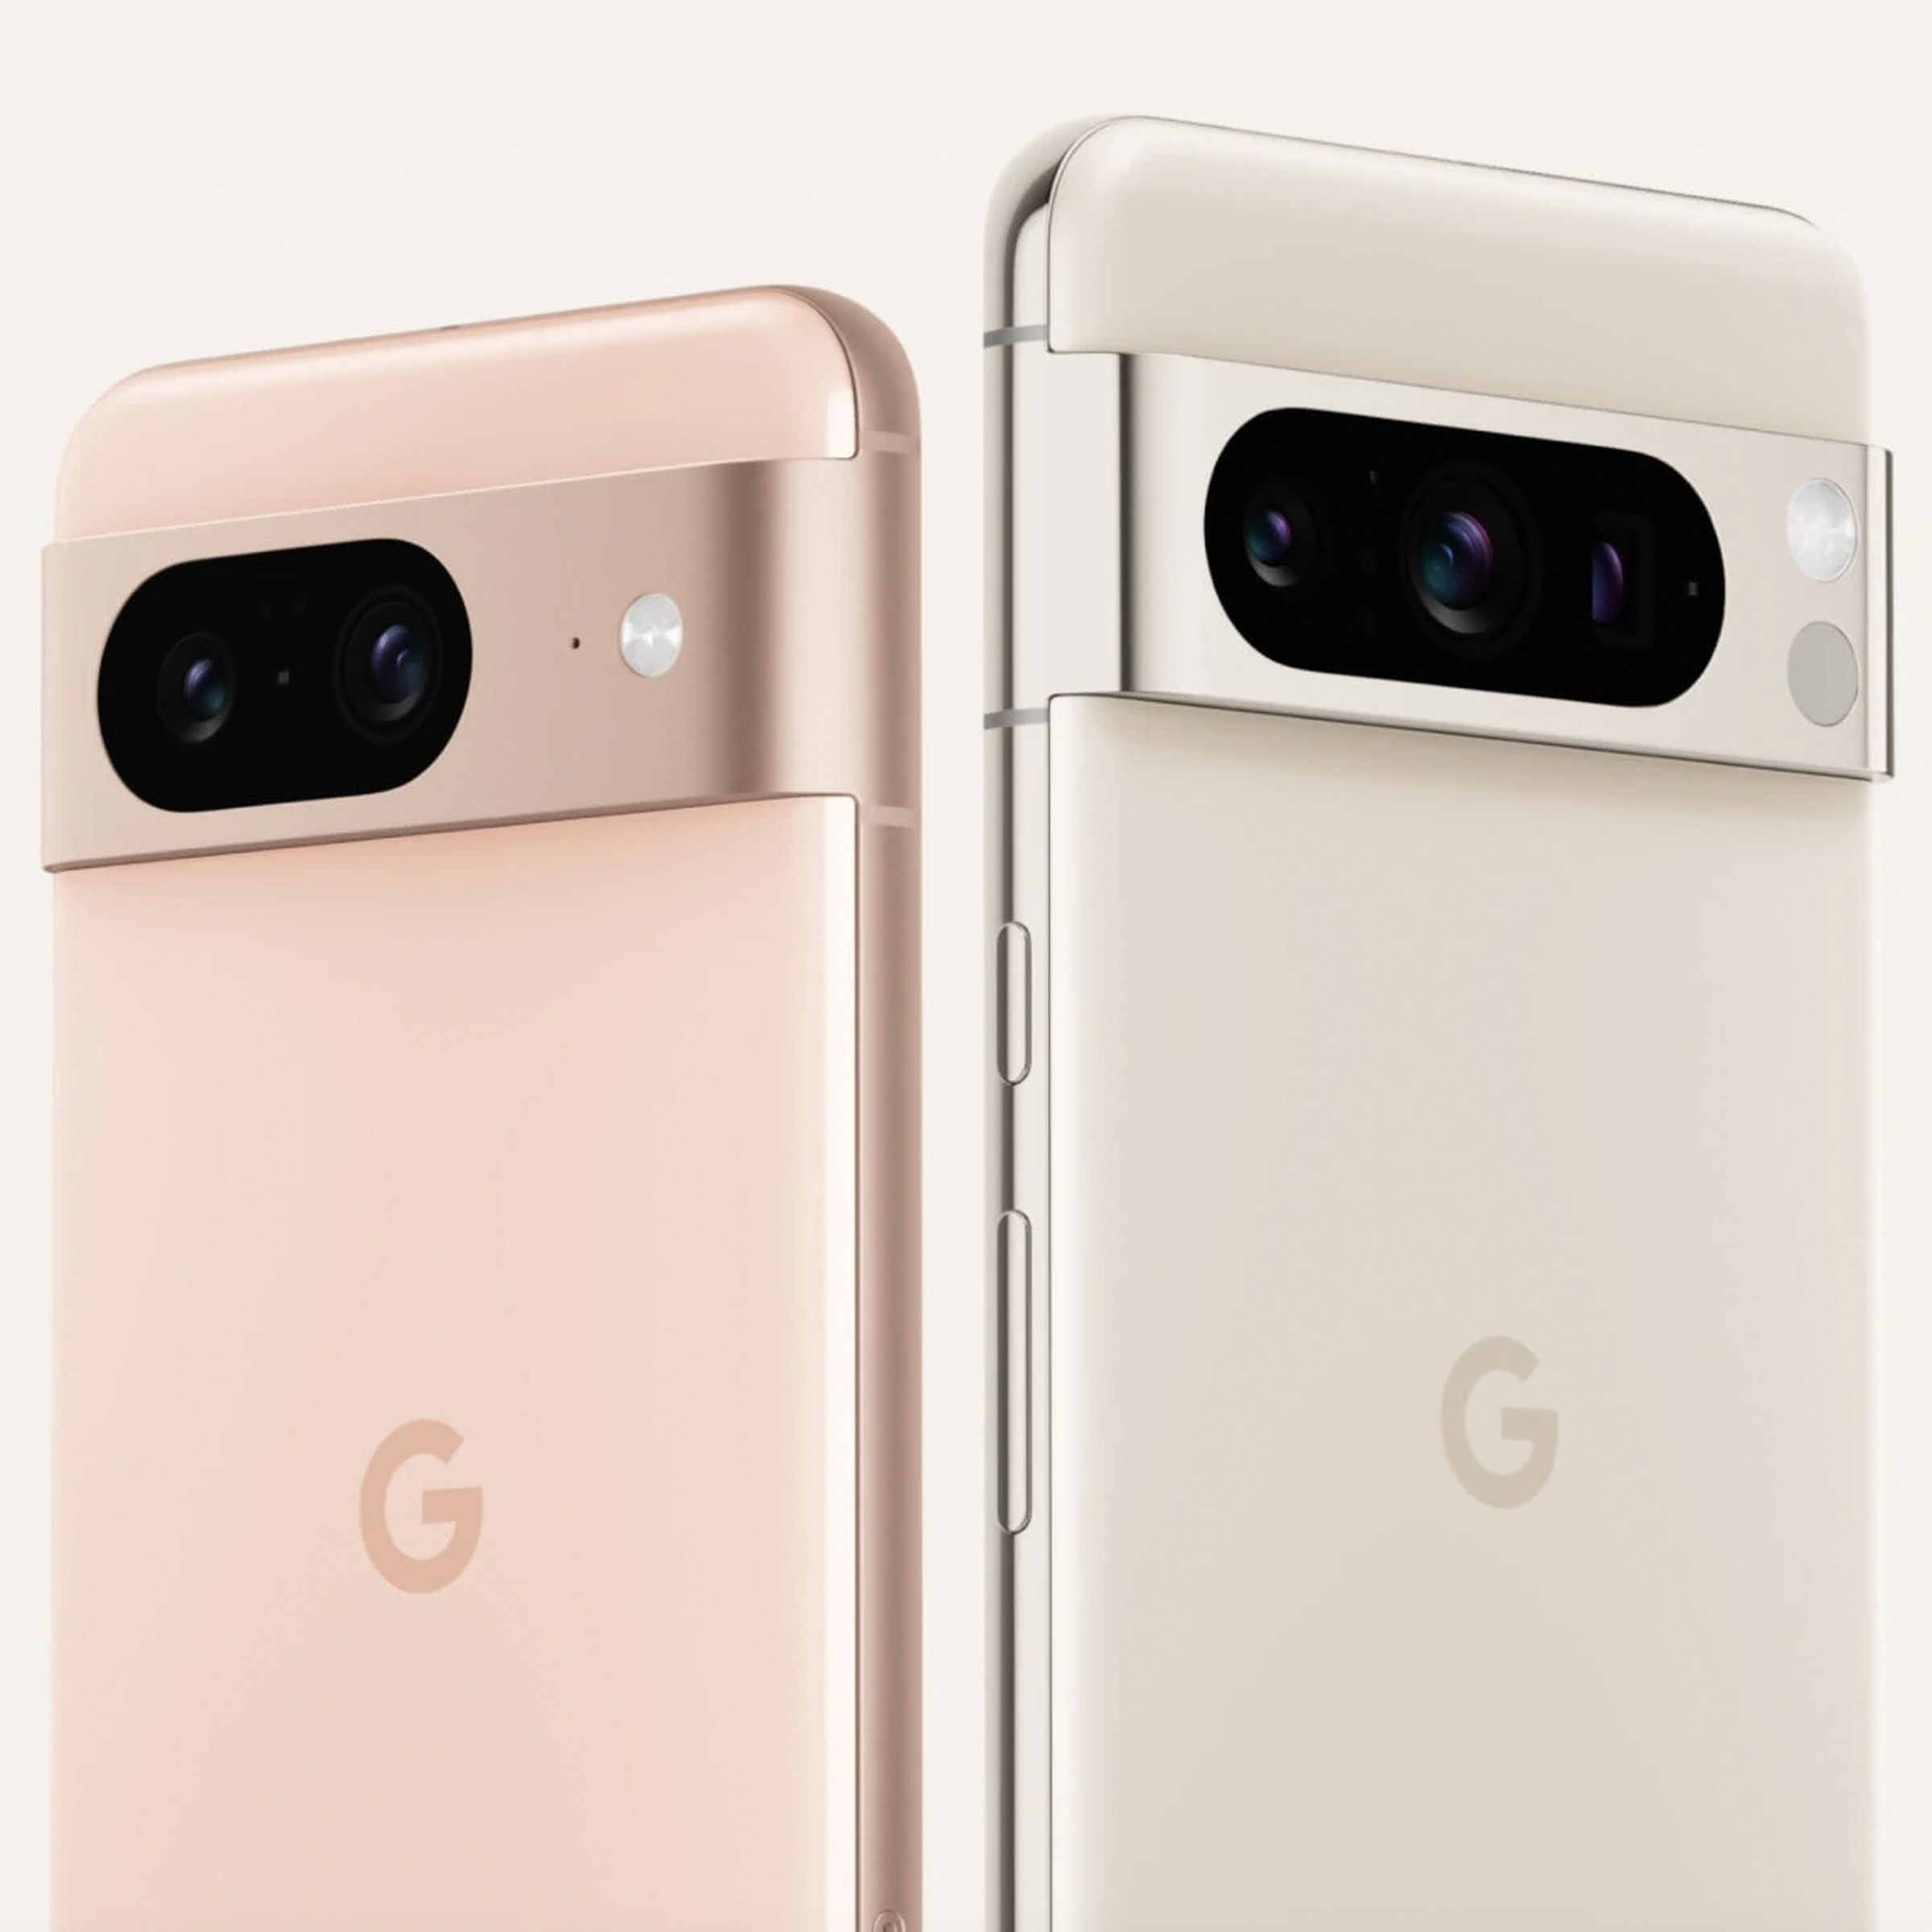 An image showing the Pixel 8 and 8 Pro